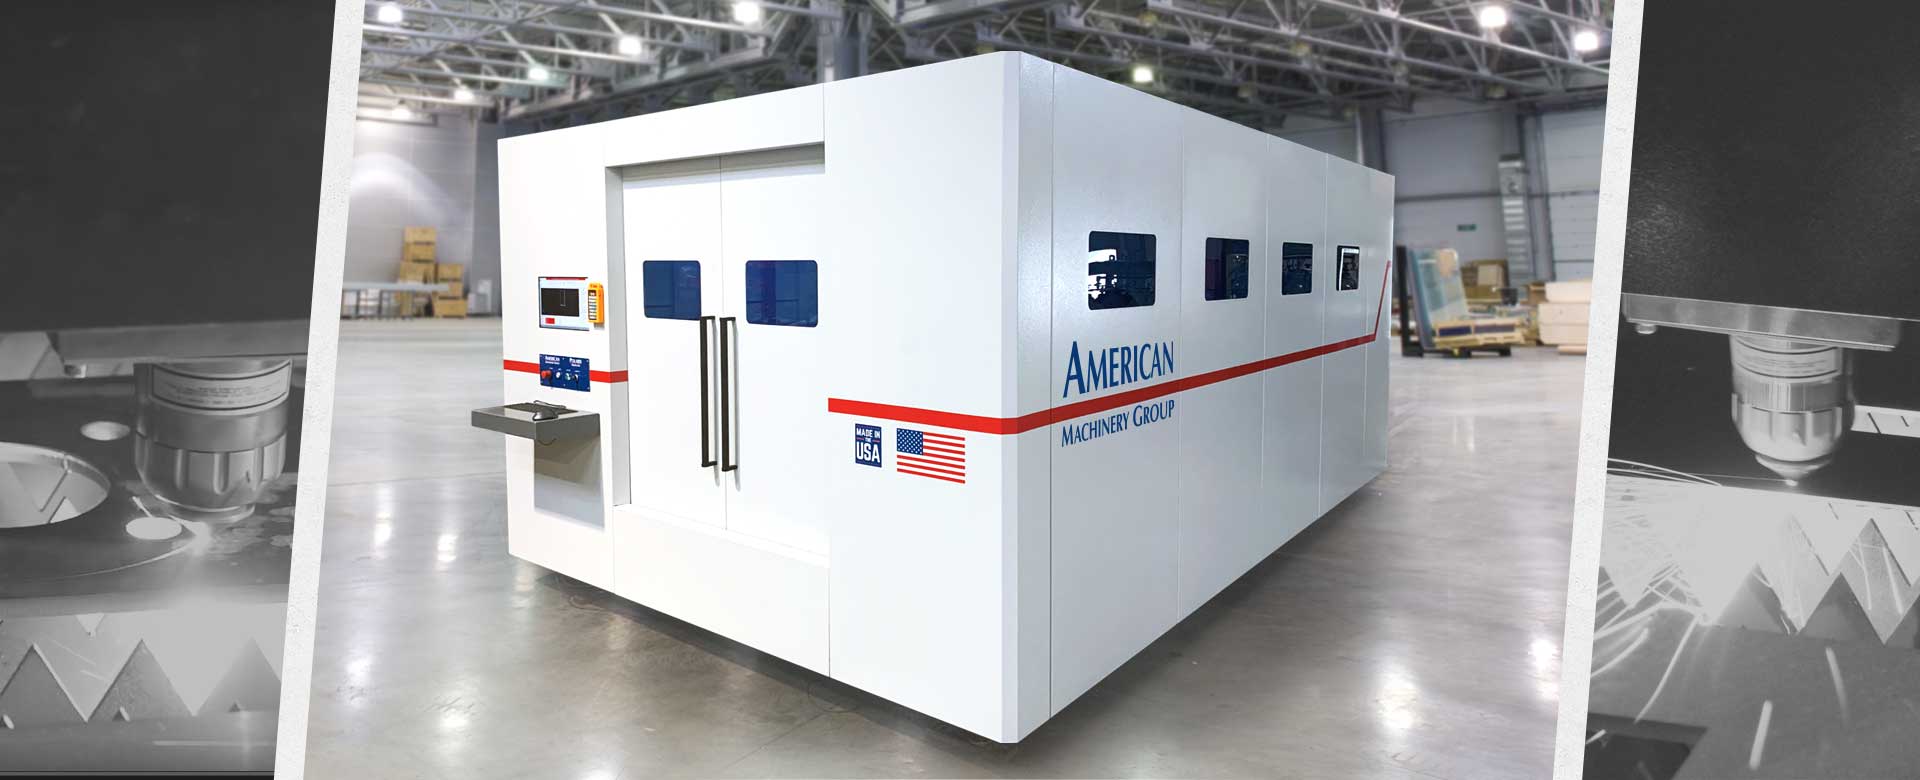 GSS Machinery offers the X12 fiber laser cutting system from American machinery Group.